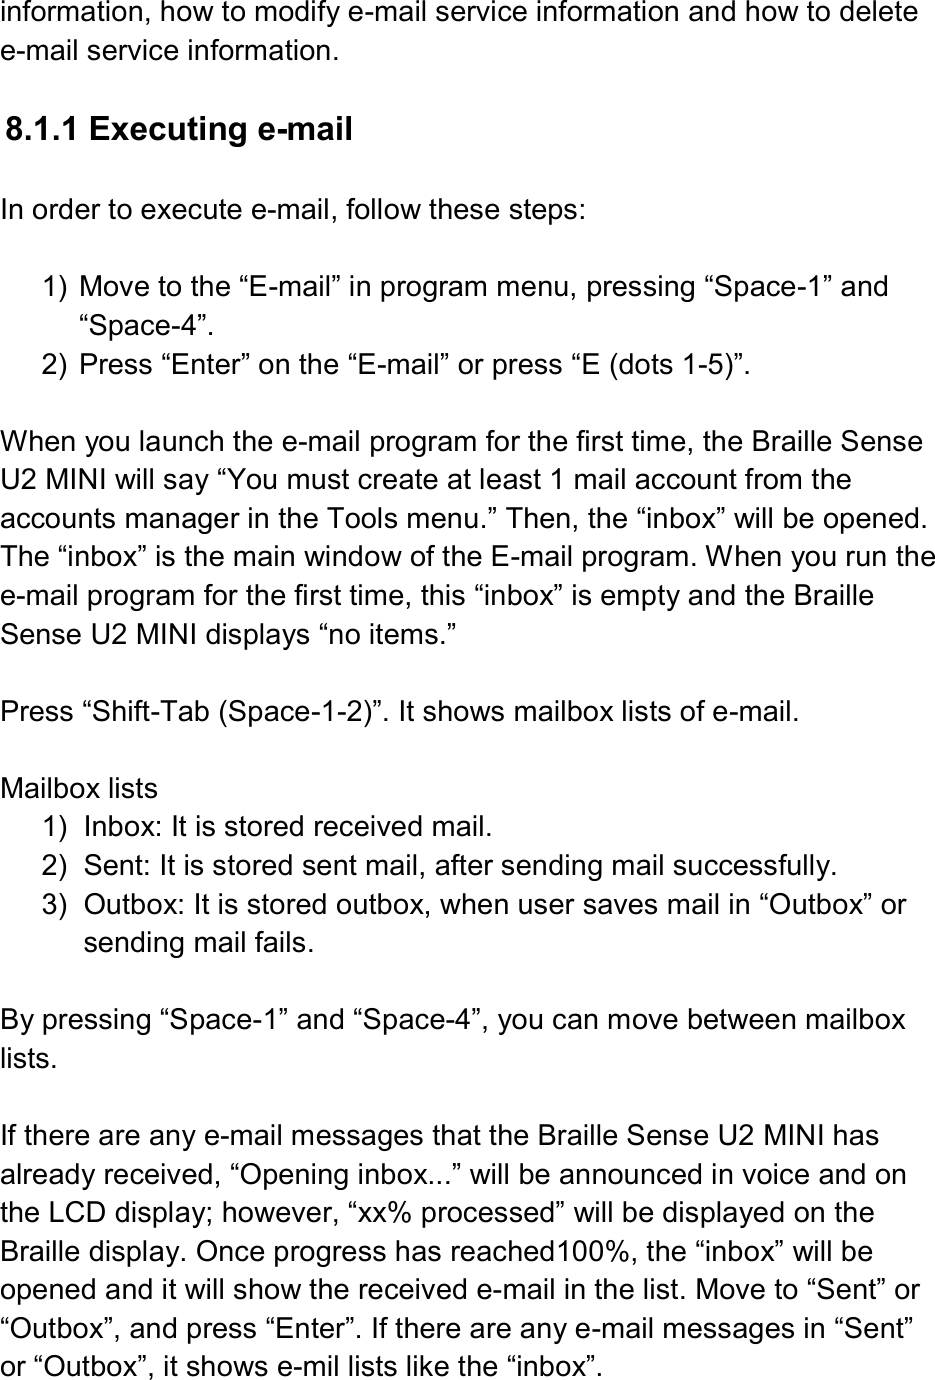  information, how to modify e-mail service information and how to delete e-mail service information.  8.1.1 Executing e-mail  In order to execute e-mail, follow these steps:  1)  Move to the “E-mail” in program menu, pressing “Space-1” and “Space-4”. 2)  Press “Enter” on the “E-mail” or press “E (dots 1-5)”.    When you launch the e-mail program for the first time, the Braille Sense U2 MINI will say “You must create at least 1 mail account from the accounts manager in the Tools menu.” Then, the “inbox” will be opened. The “inbox” is the main window of the E-mail program. When you run the e-mail program for the first time, this “inbox” is empty and the Braille Sense U2 MINI displays “no items.”  Press “Shift-Tab (Space-1-2)”. It shows mailbox lists of e-mail.  Mailbox lists 1)  Inbox: It is stored received mail. 2)  Sent: It is stored sent mail, after sending mail successfully.   3)  Outbox: It is stored outbox, when user saves mail in “Outbox” or sending mail fails.  By pressing “Space-1” and “Space-4”, you can move between mailbox lists.  If there are any e-mail messages that the Braille Sense U2 MINI has already received, “Opening inbox...” will be announced in voice and on the LCD display; however, “xx% processed” will be displayed on the Braille display. Once progress has reached100%, the “inbox” will be opened and it will show the received e-mail in the list. Move to “Sent” or “Outbox”, and press “Enter”. If there are any e-mail messages in “Sent” or “Outbox”, it shows e-mil lists like the “inbox”.   